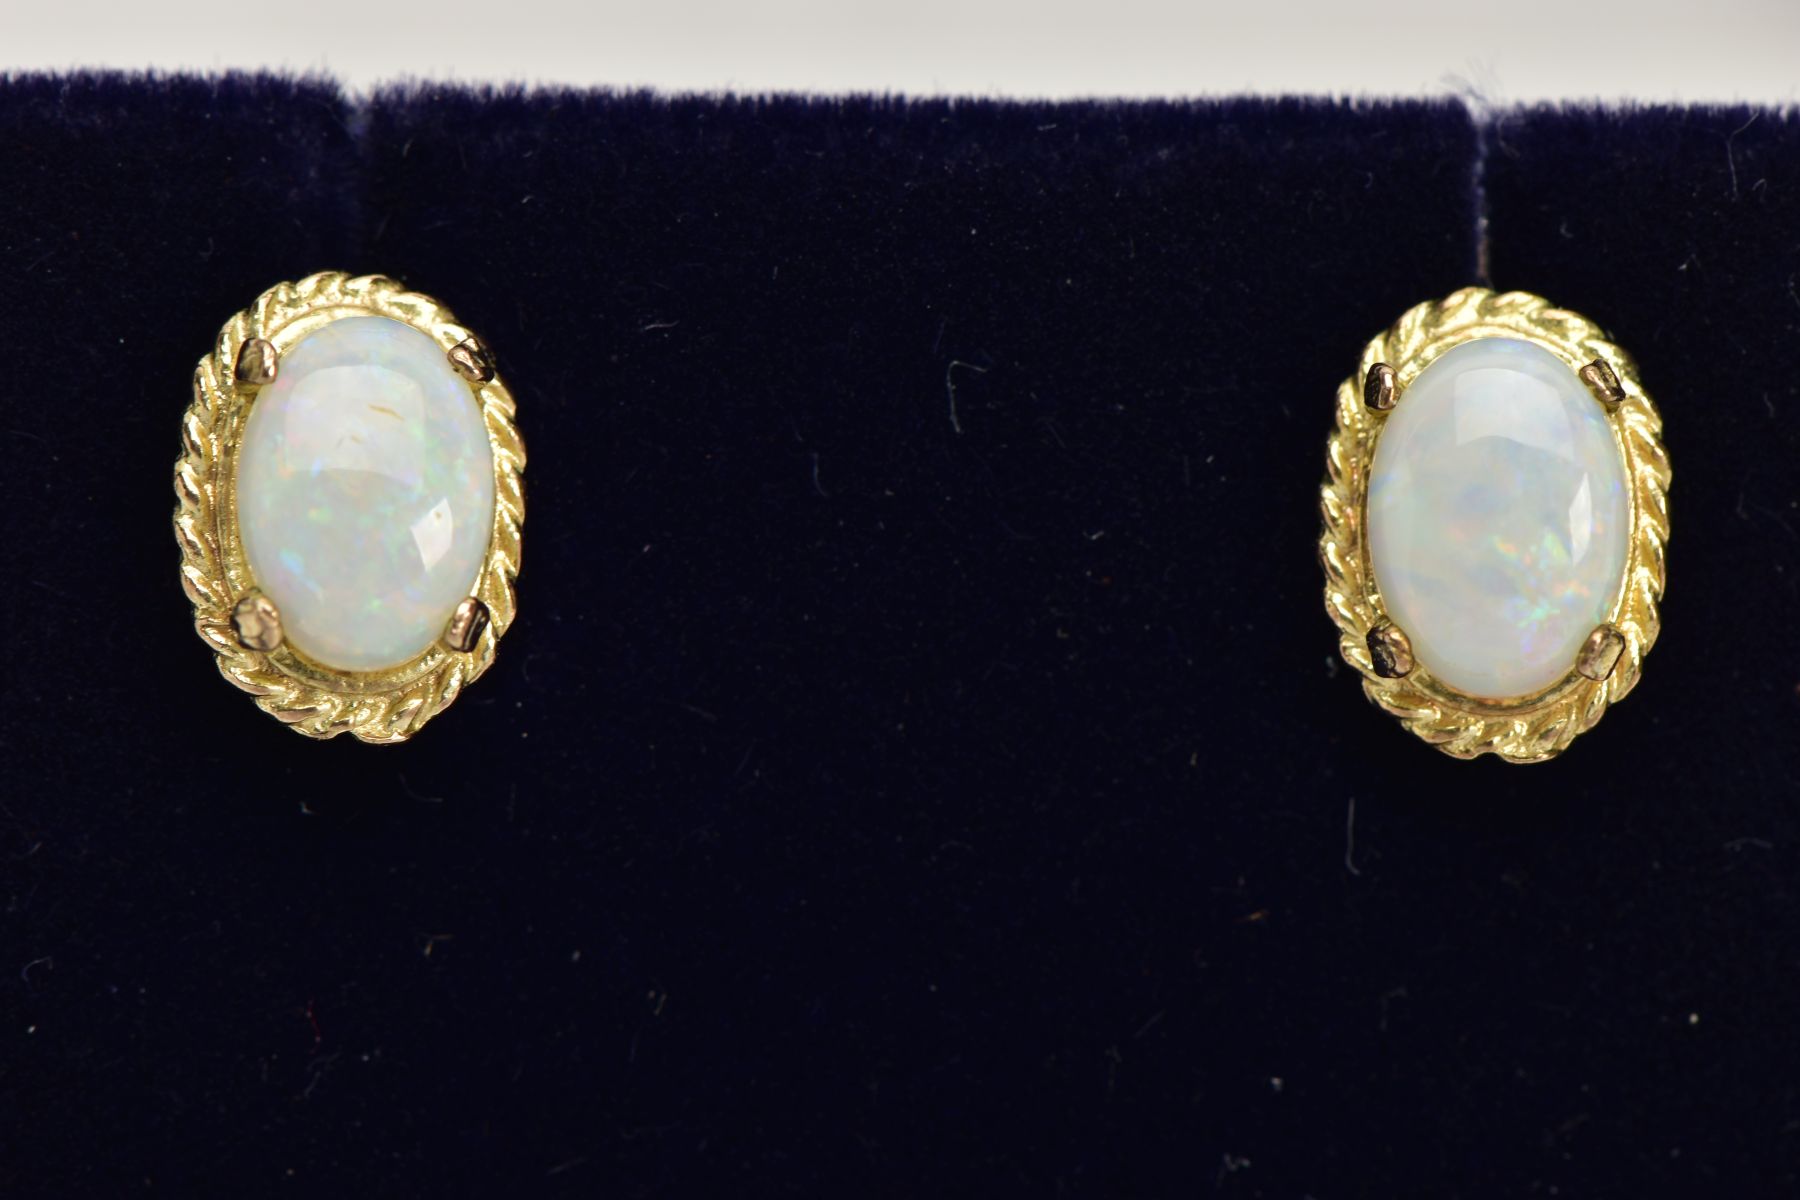 TWO PAIRS OF OPAL EARRINGS, the first of an oval design, set with an oval opal cabochon, within a - Image 3 of 3